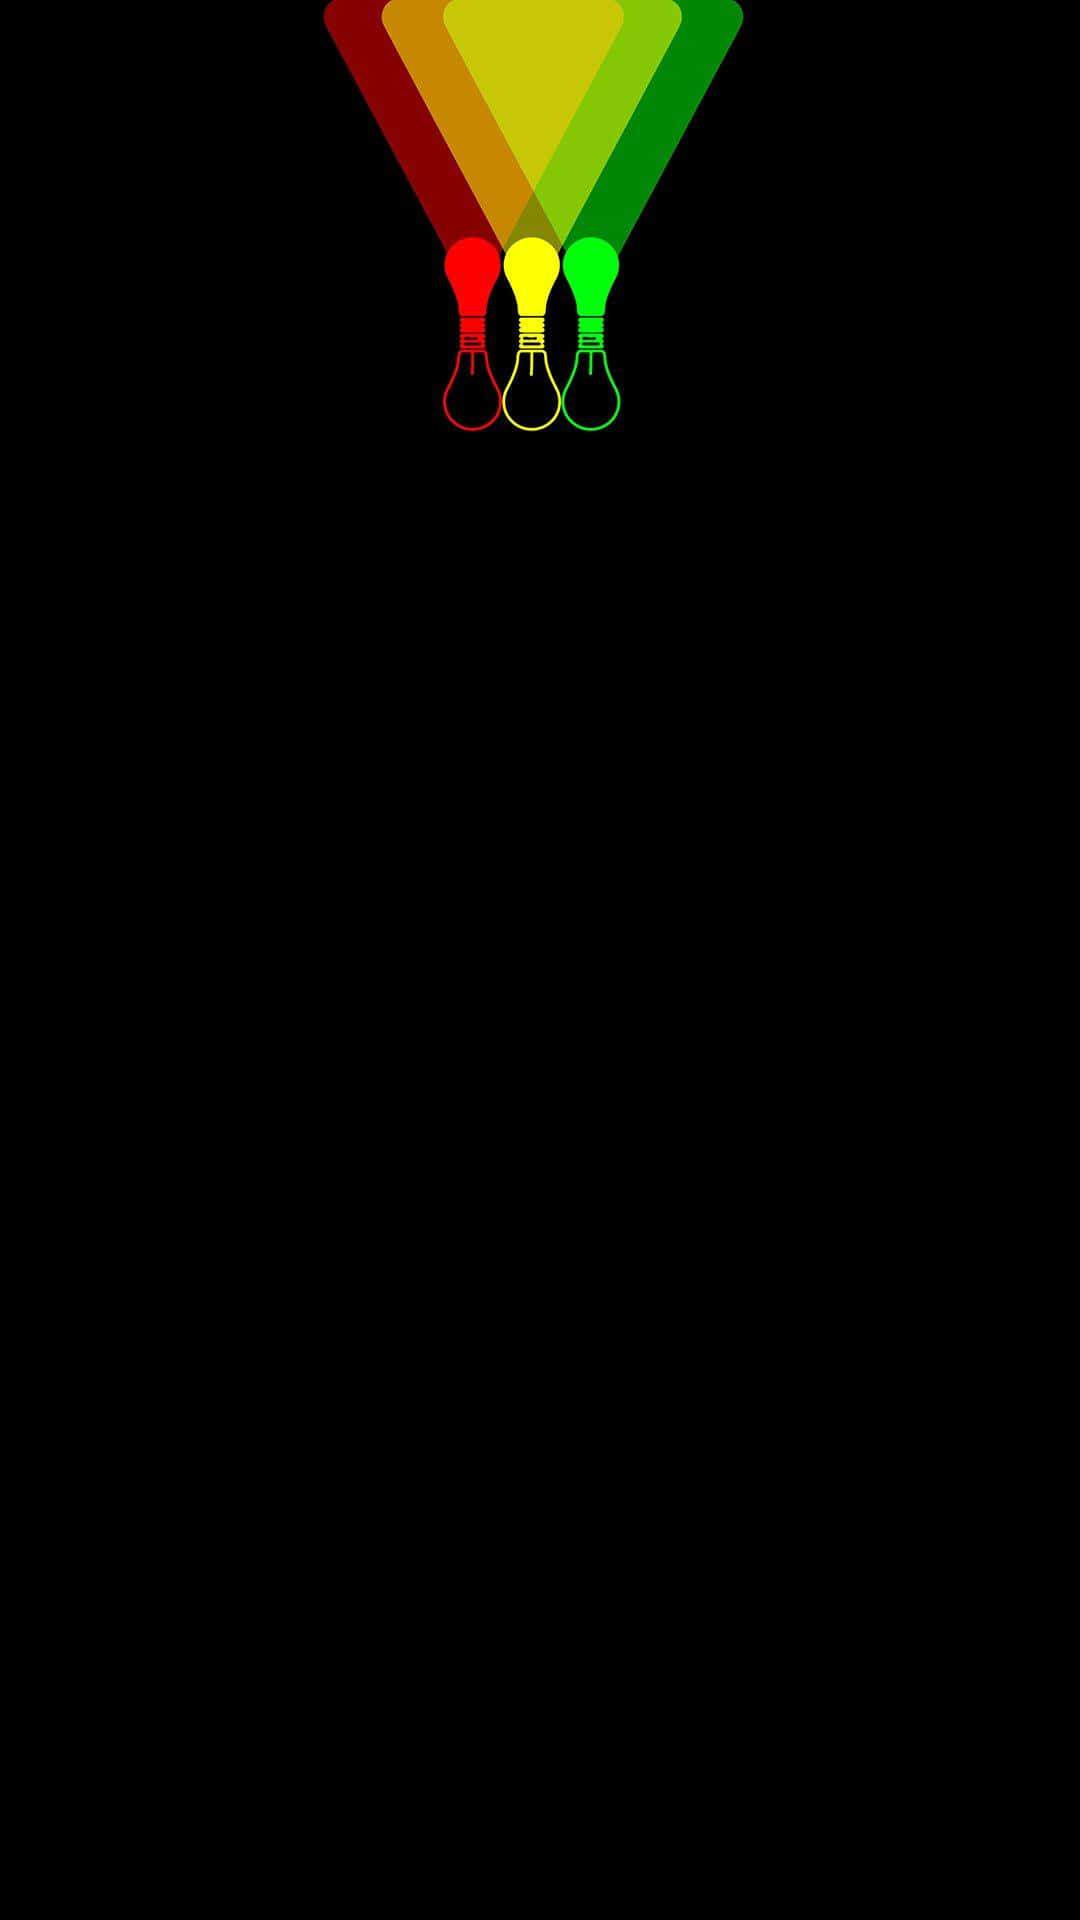 Amoled Background Green Yellow Red Bulbs